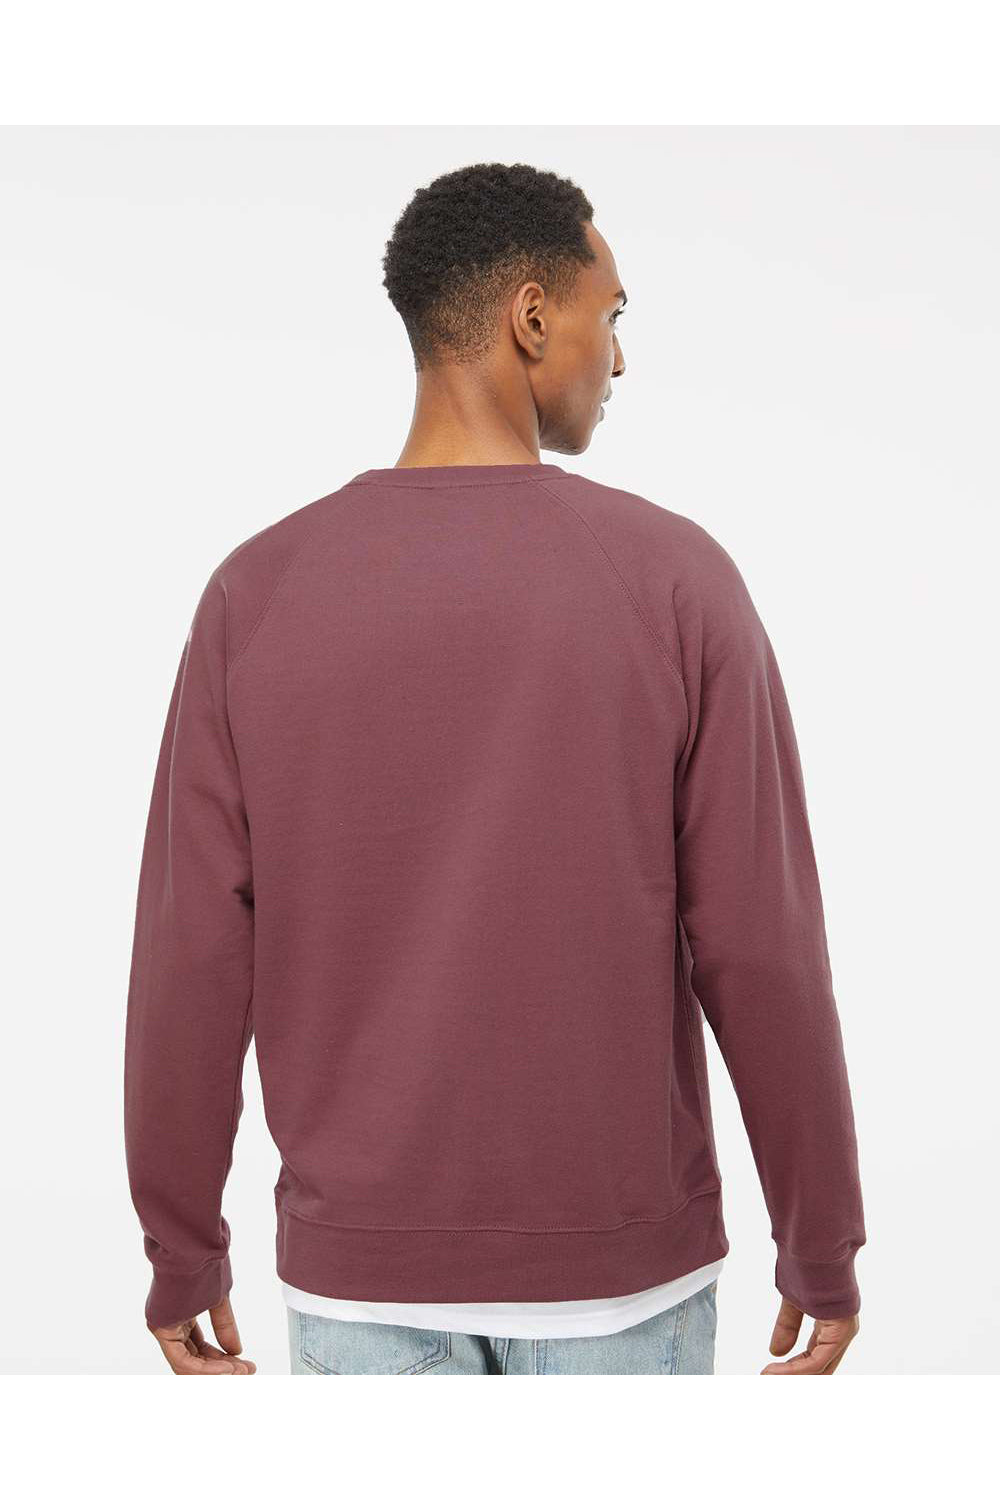 Independent Trading Co. SS1000C Mens Icon Loopback Terry Crewneck Sweatshirt Port Model Back